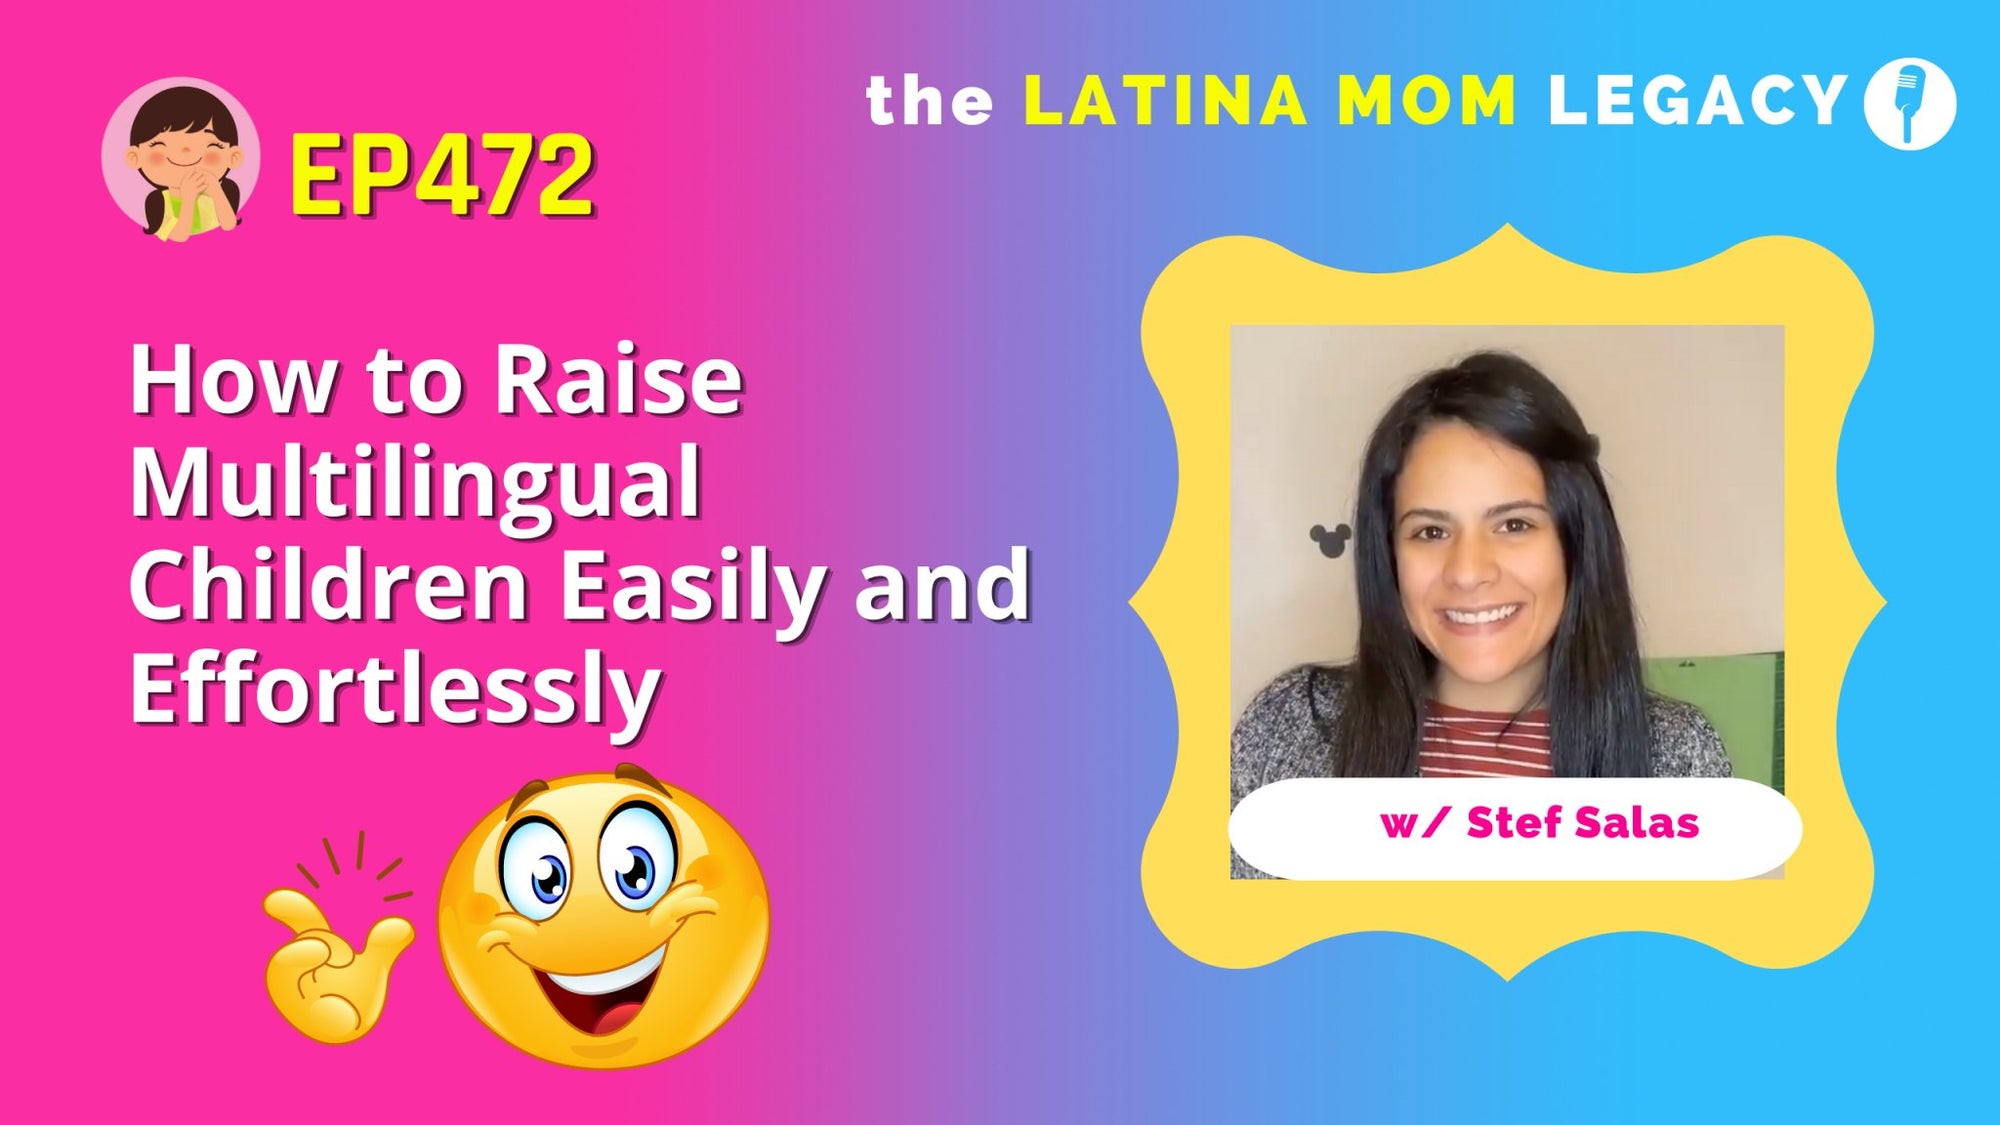 472-Stef Salas: How to Raise Multilingual Children Easily and Effortlessly - Mi LegaSi